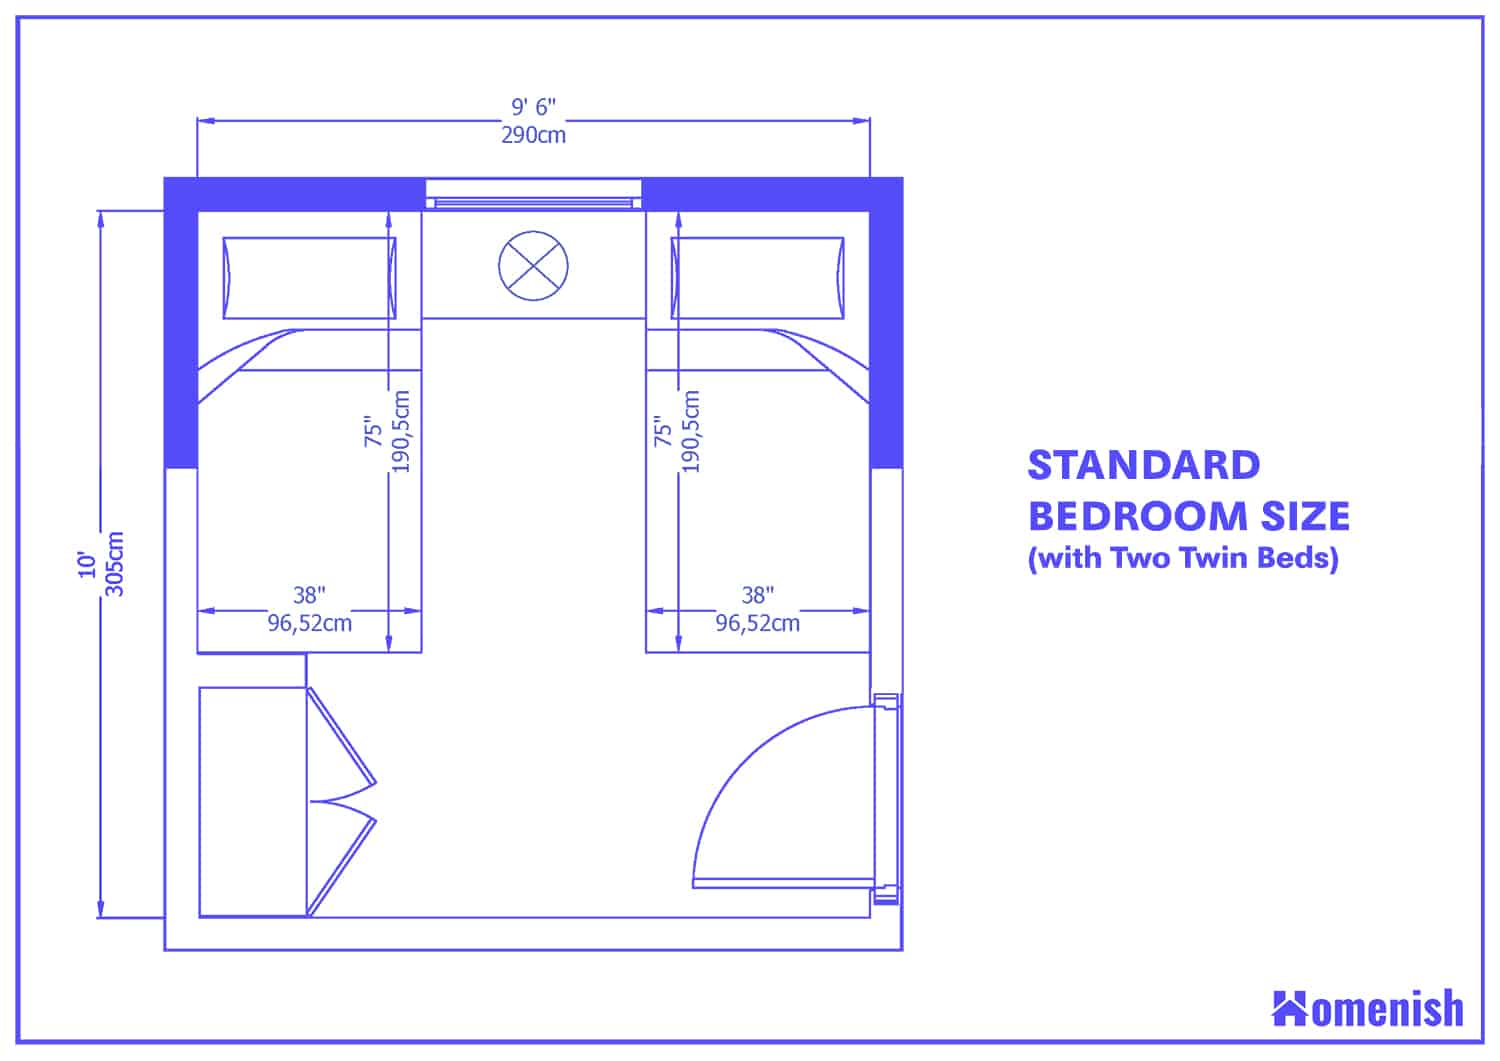 Average Bedroom Size For 9 Bedroom Layouts With Diagrams Homenish